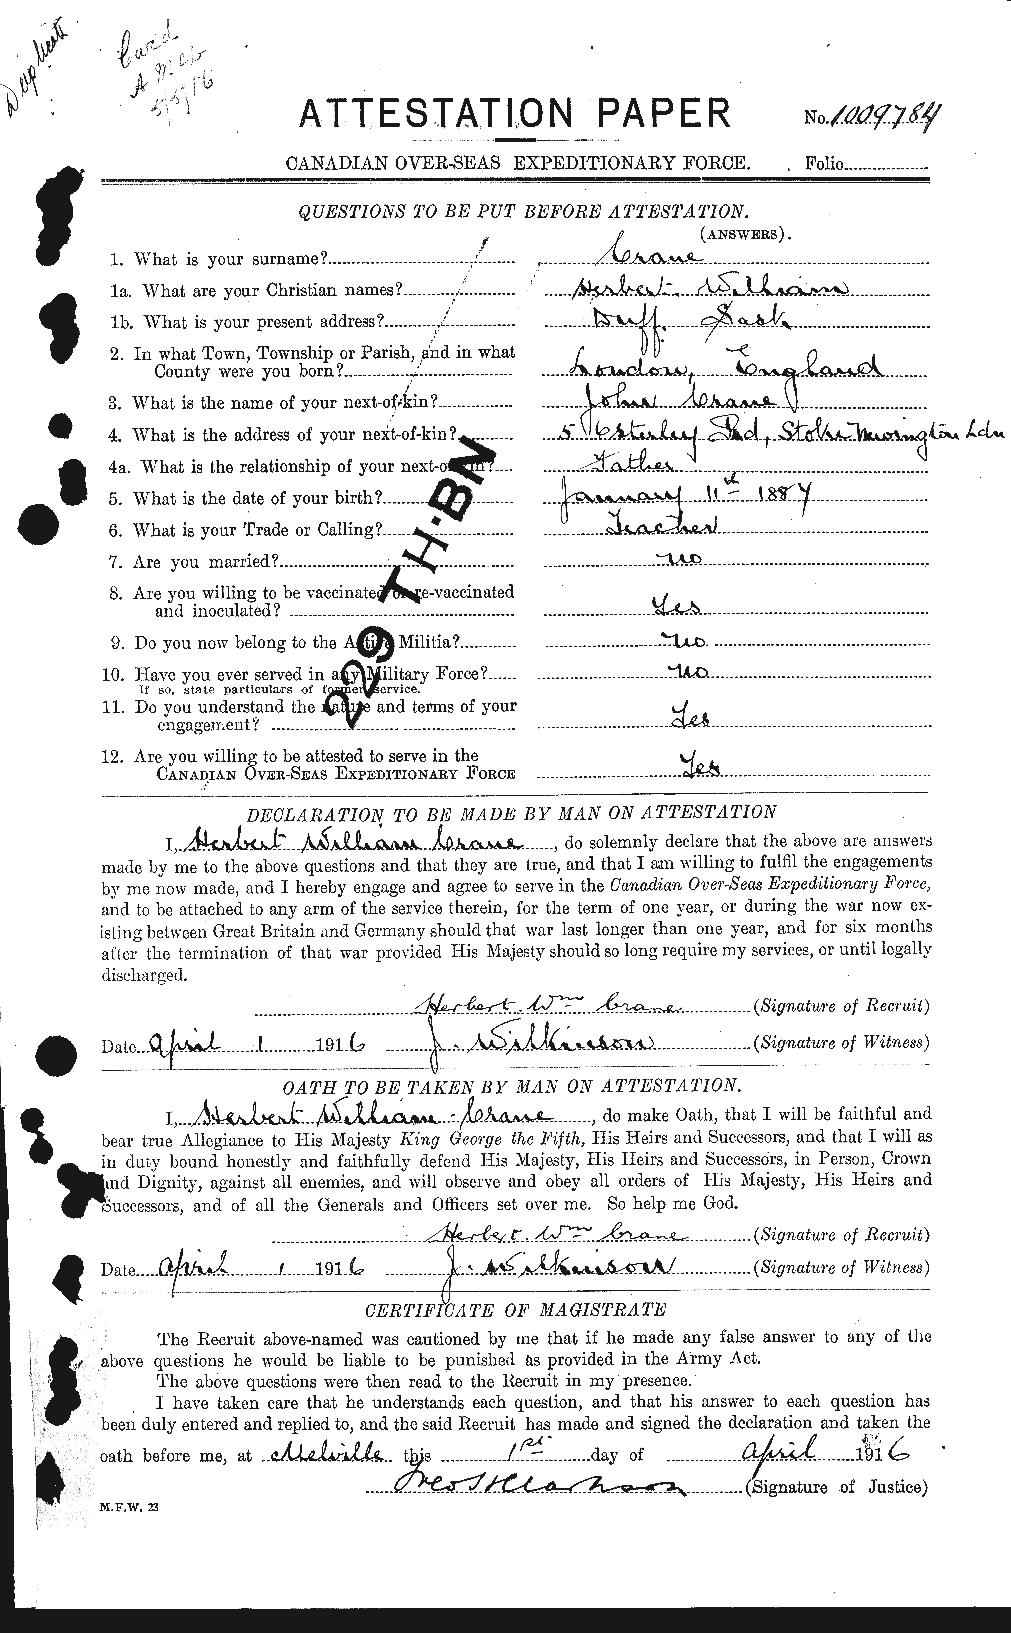 Personnel Records of the First World War - CEF 061996a